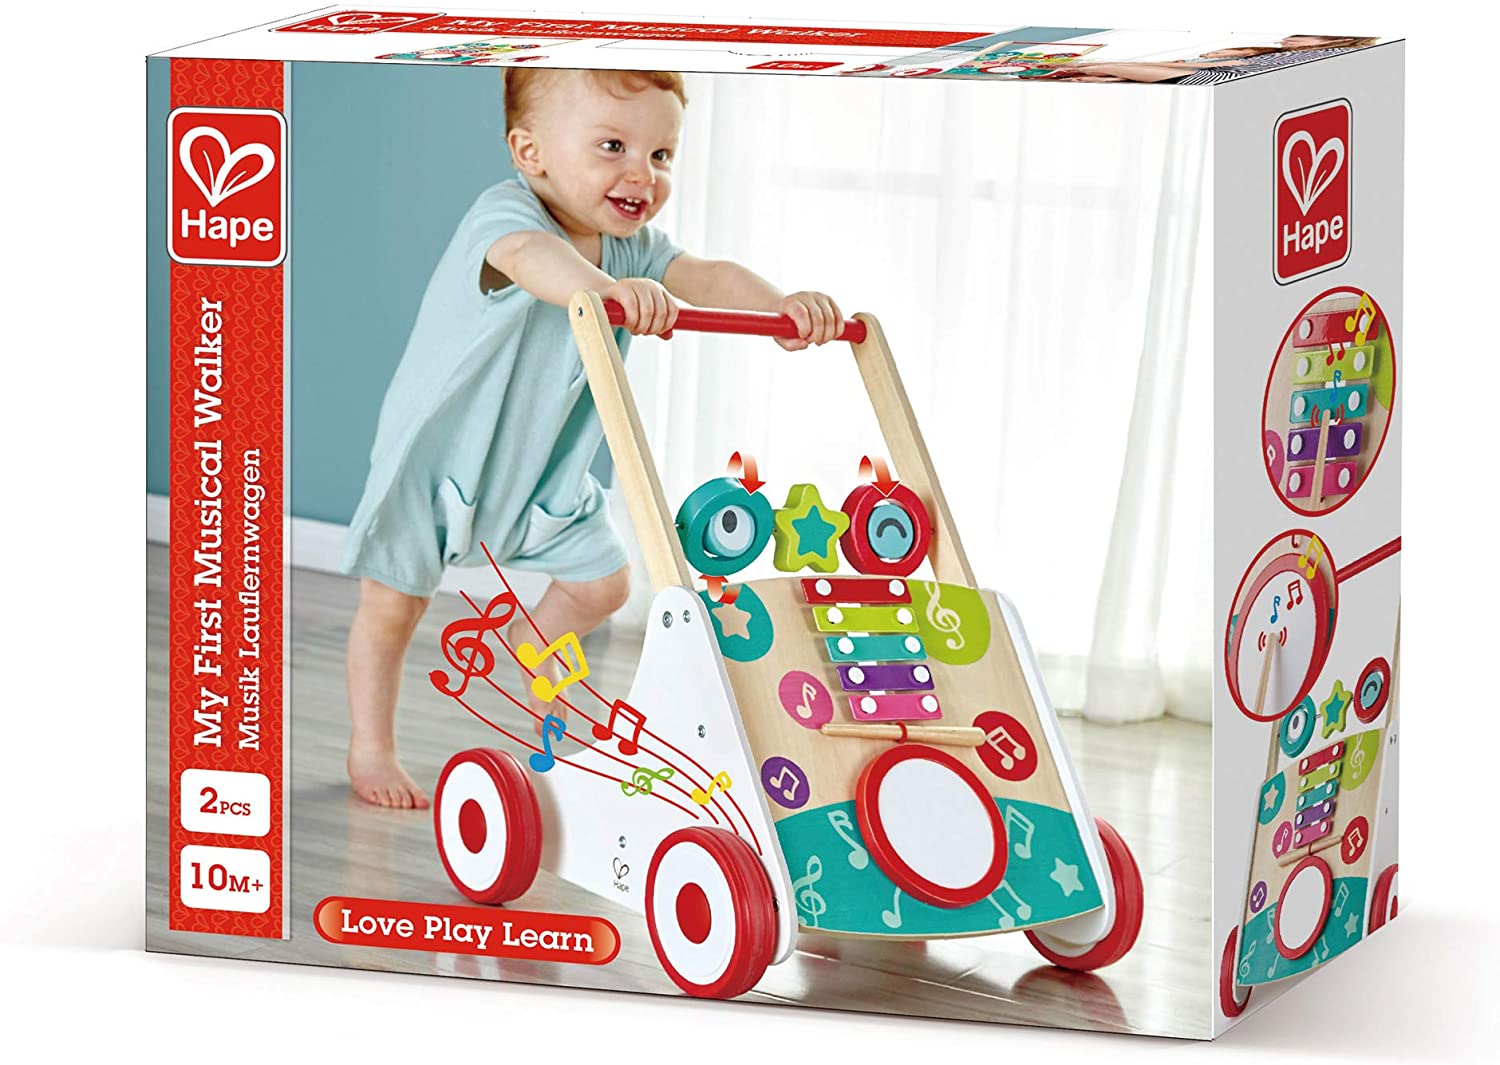 (OPEN BOX) Hape Wooden Push and Pull Music Learning Walker| Multiple Activities Center for Toddlers Ages 10 Months and Up